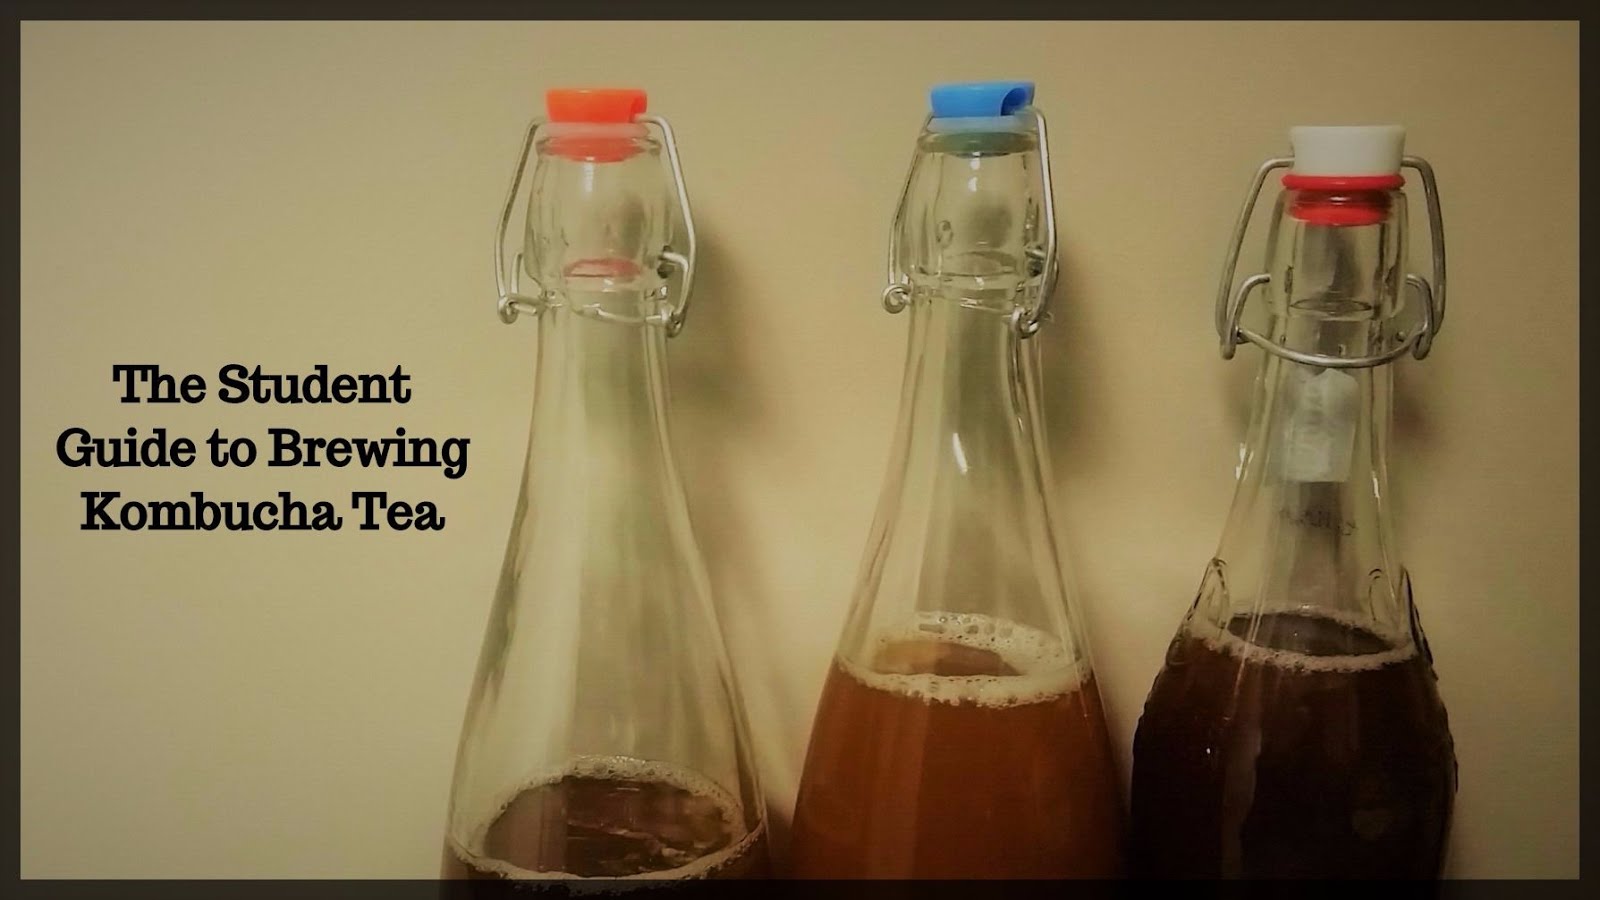 The Student Guide to Brewing Kombucha Tea